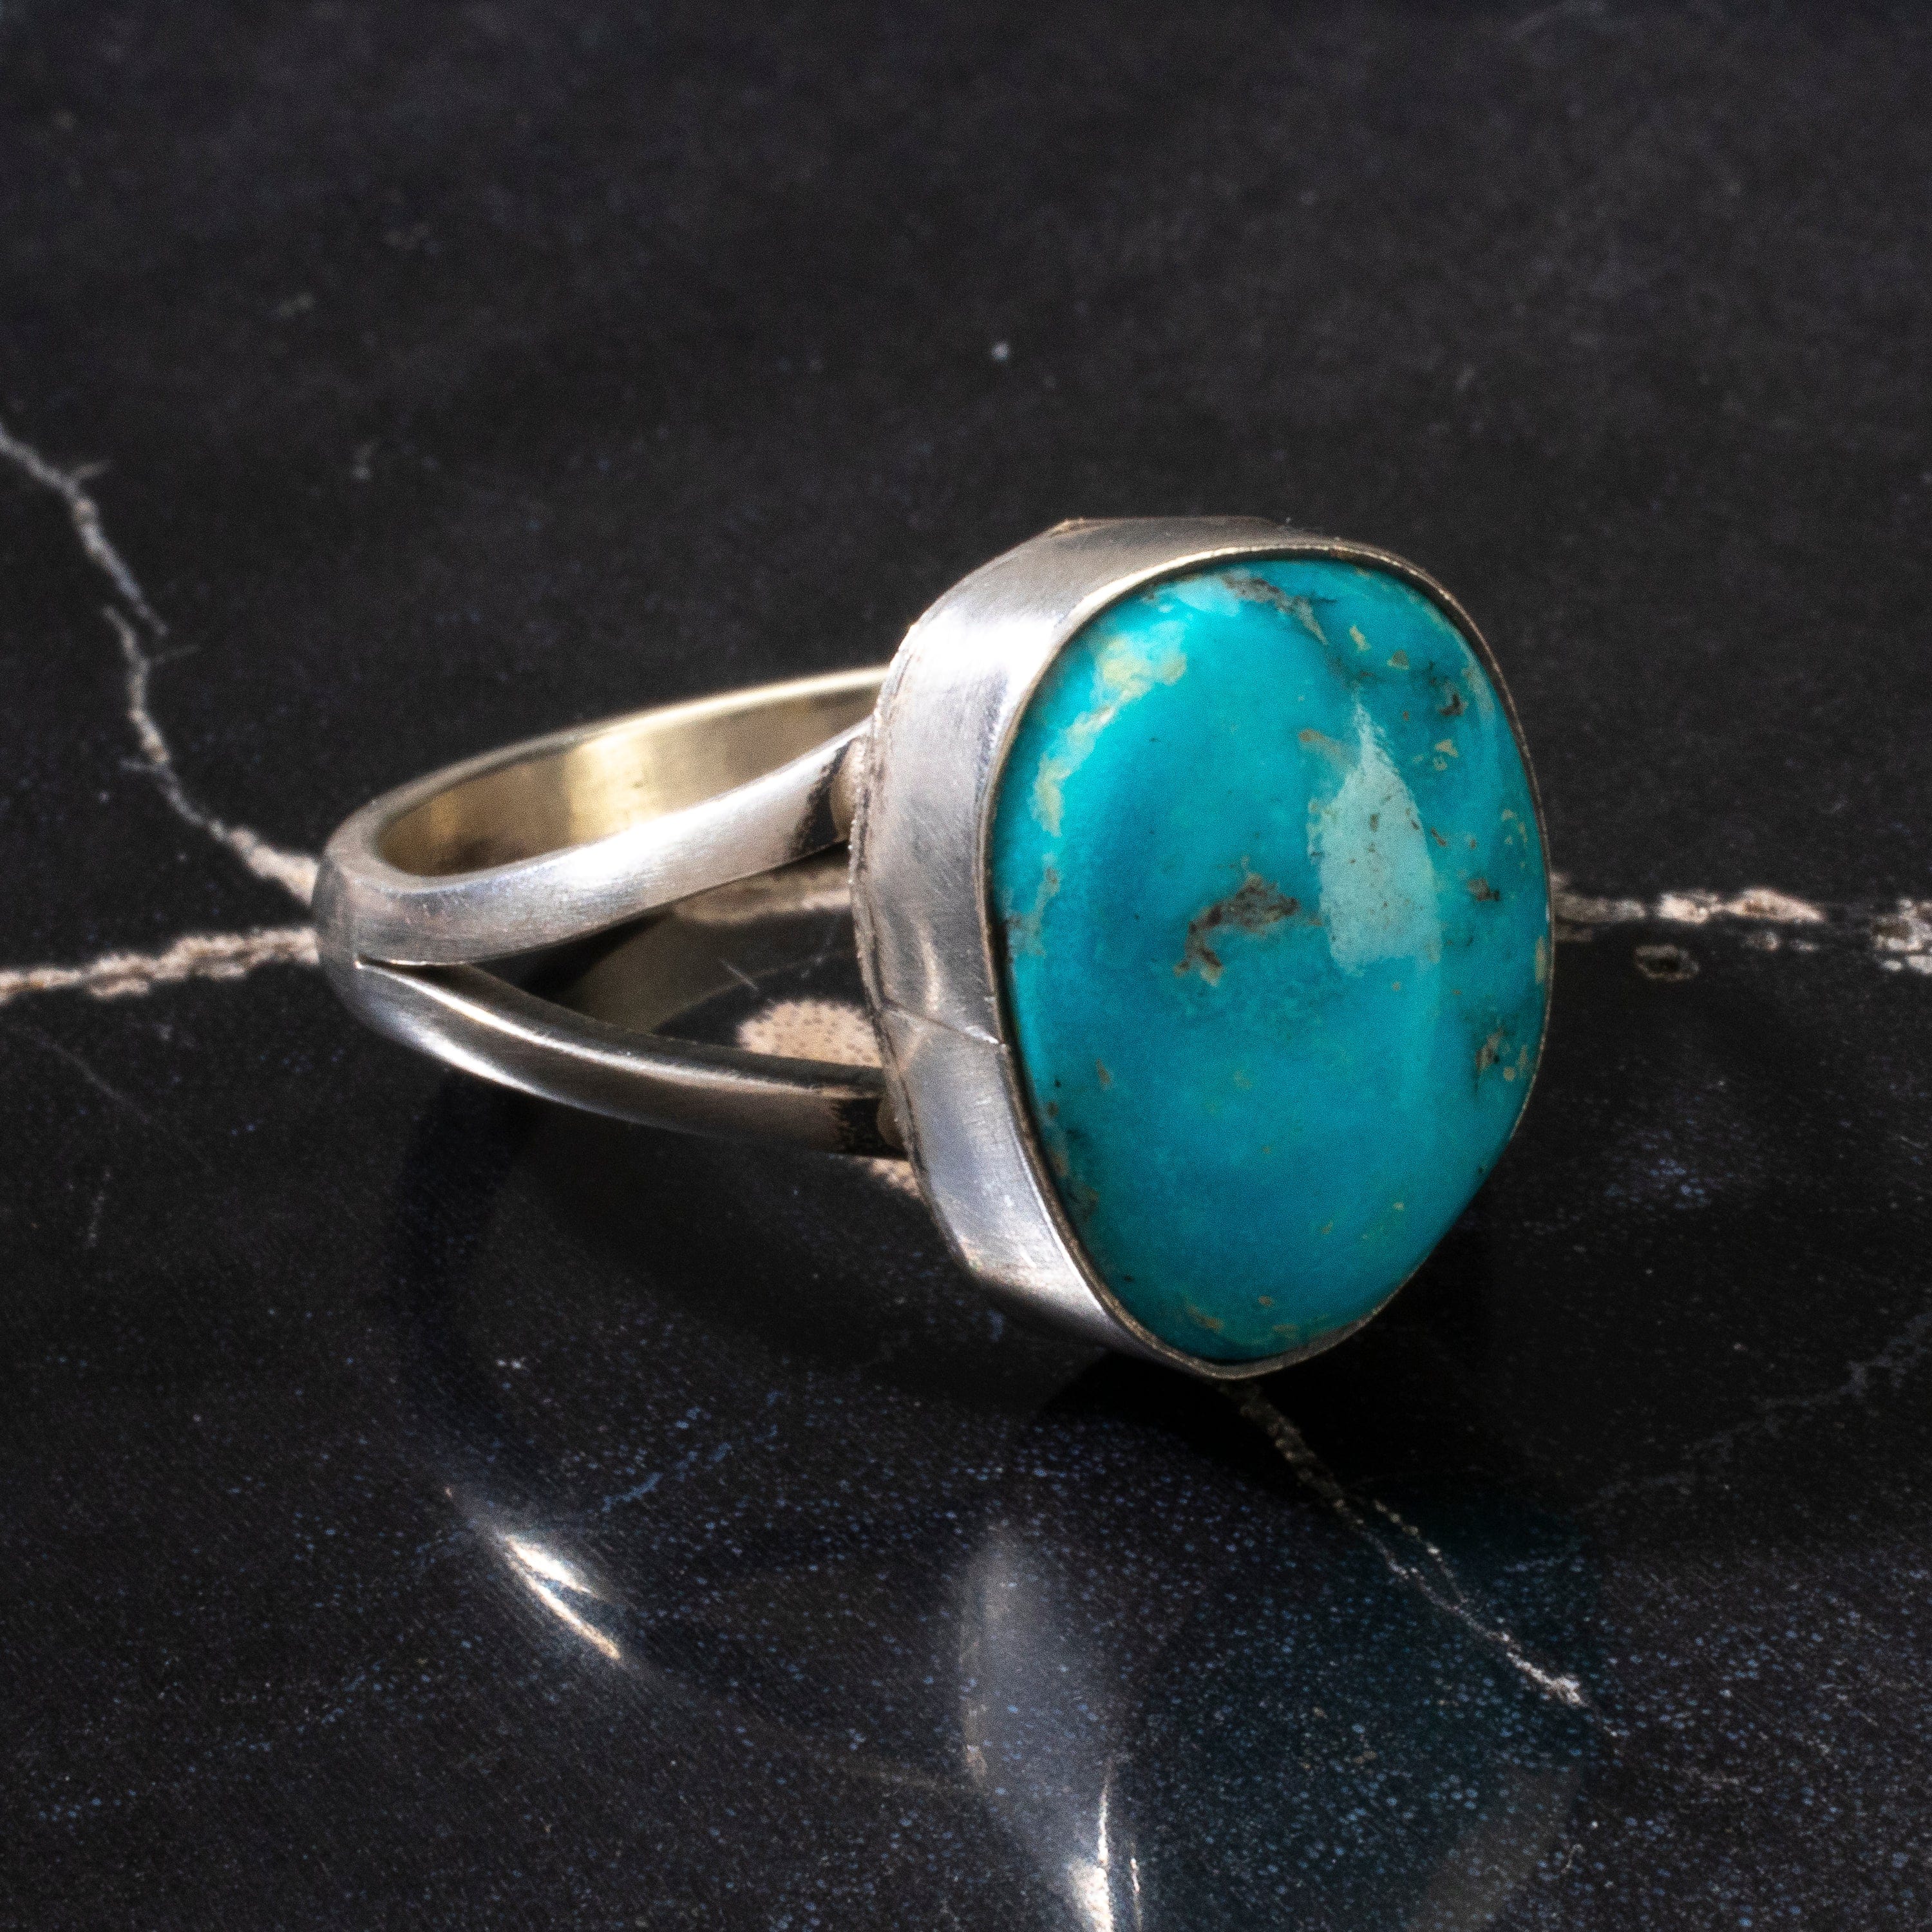 Kalifano Native American Jewelry 9 Scott Skeets Blue Ridge Turquoise USA Native American Made 925 Sterling Silver Ring NAR500.098.9